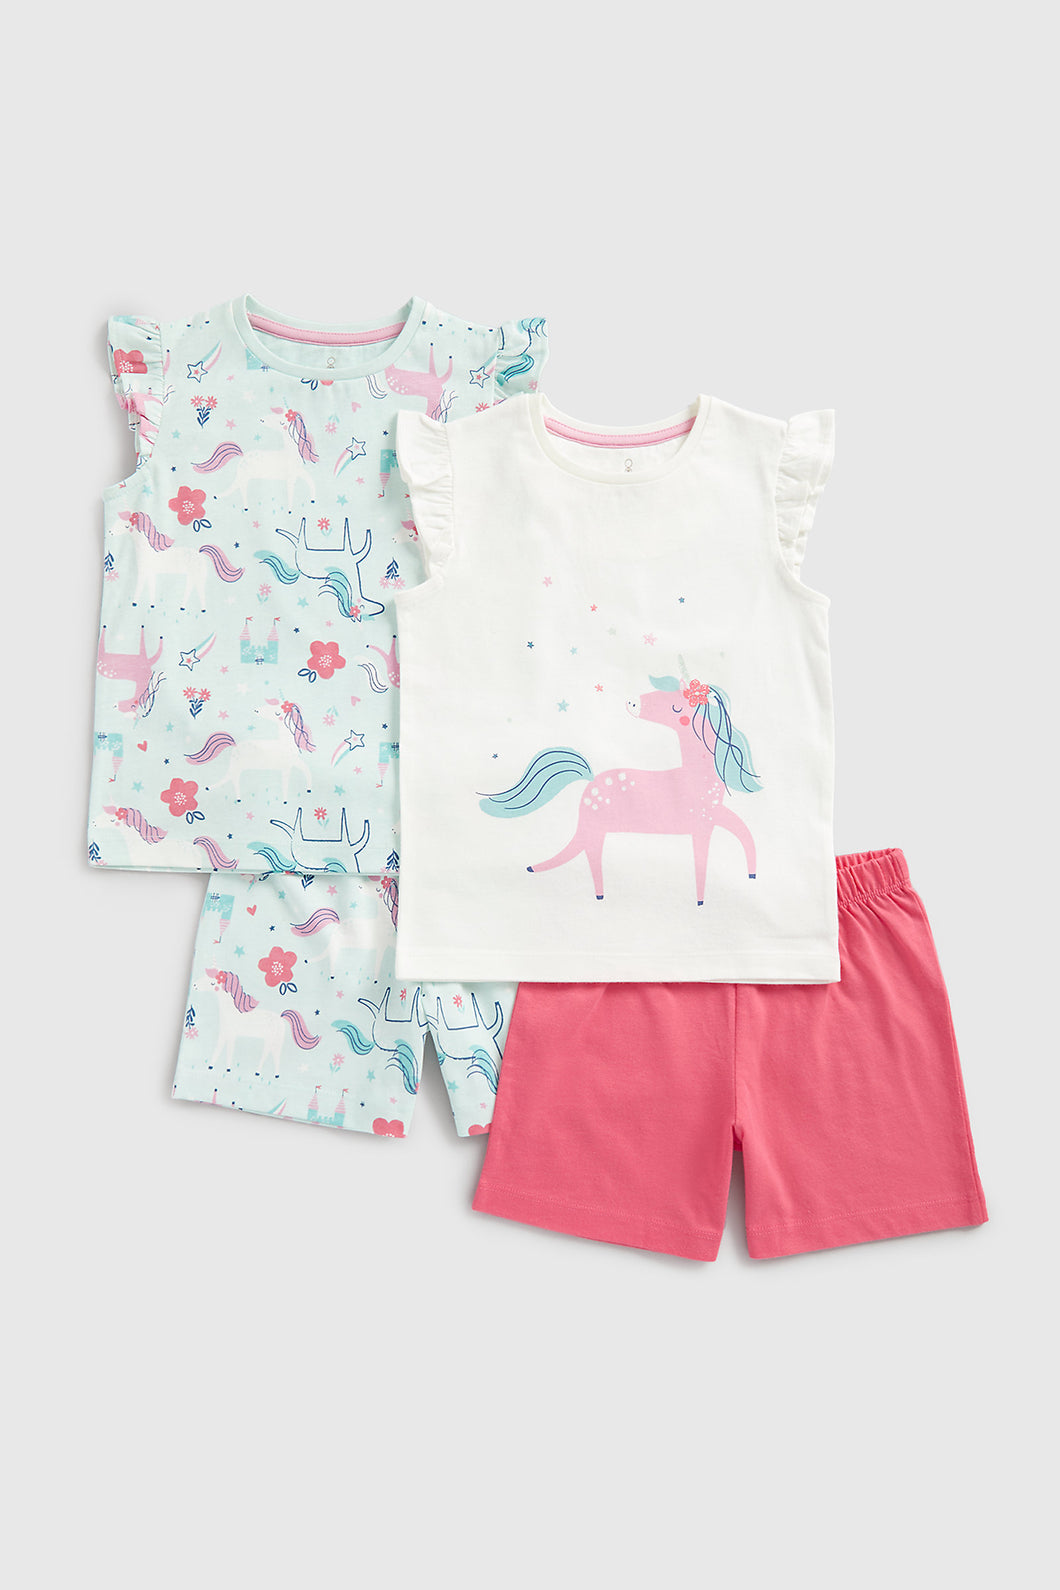 Mothercare Party Horse Shortie Pyjamas - 2 Pack